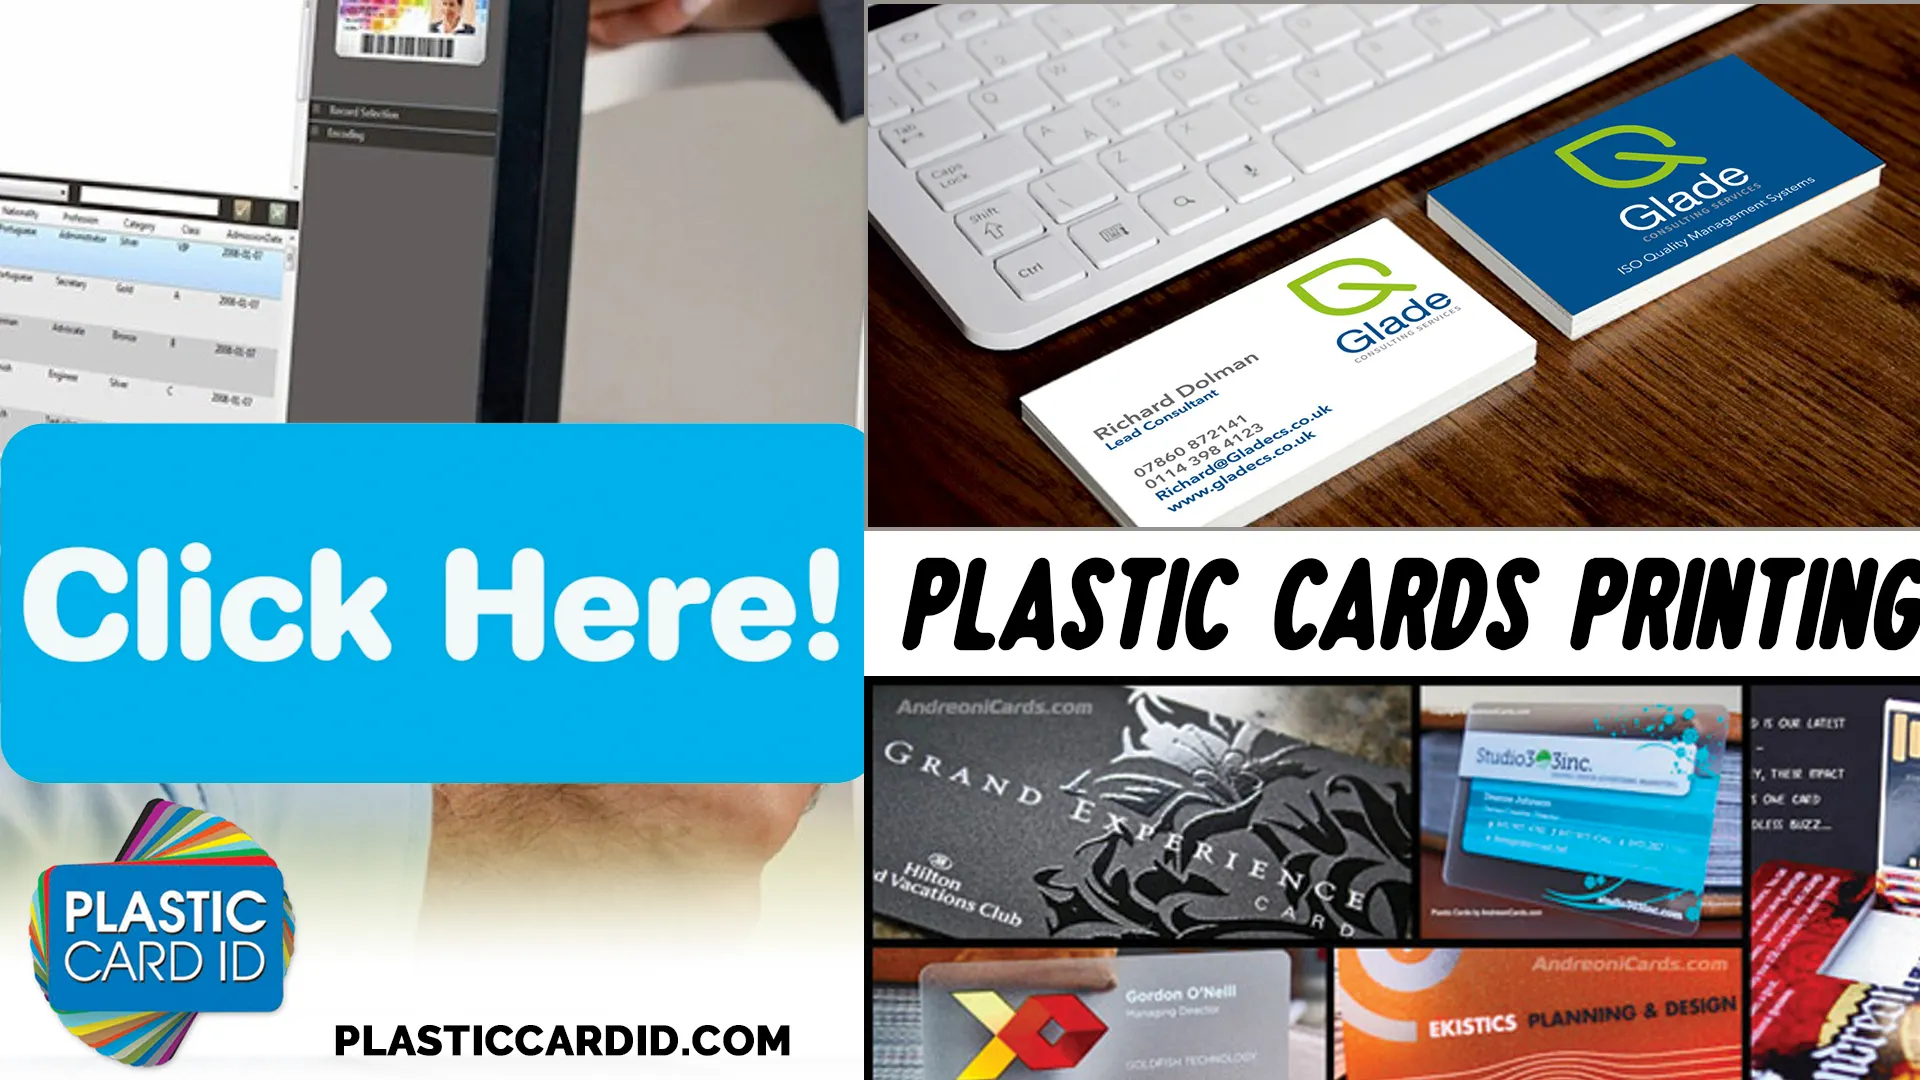 A Spectrum of Applications for Weatherproof Plastic Cards